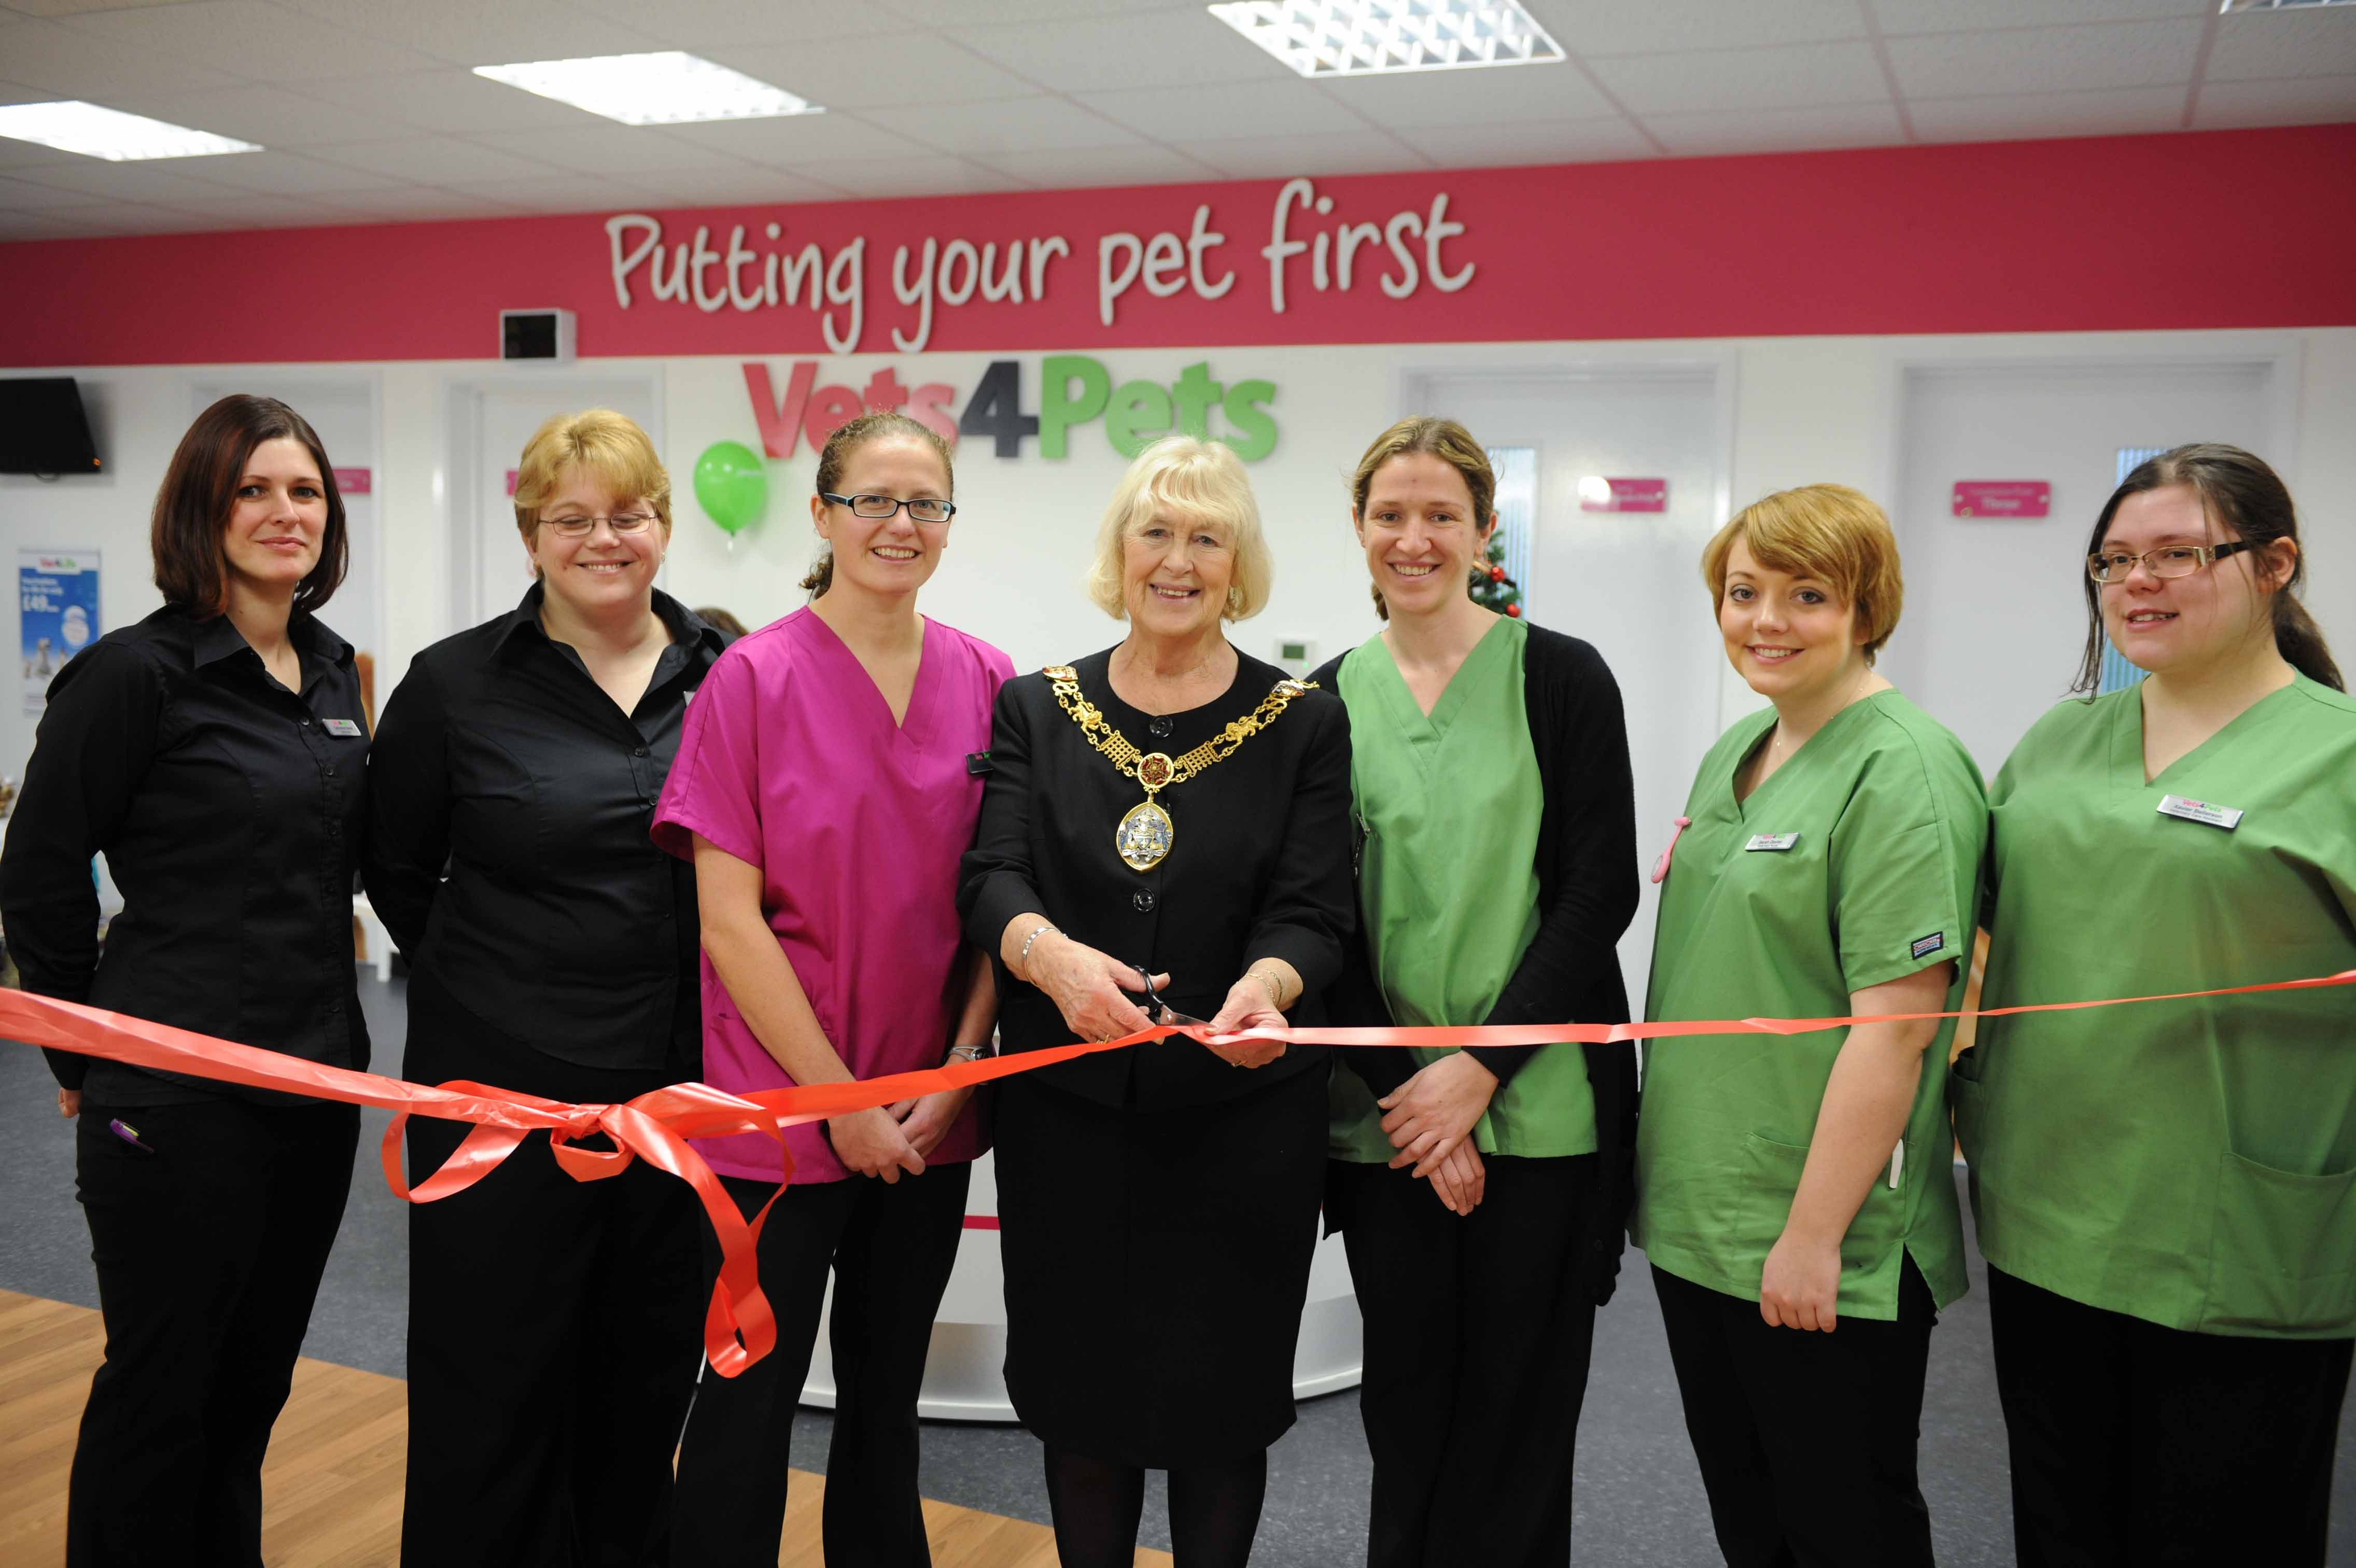 Pictured: Louise and Phyllis with their new team, with the Mayor cutting the ribbon.  